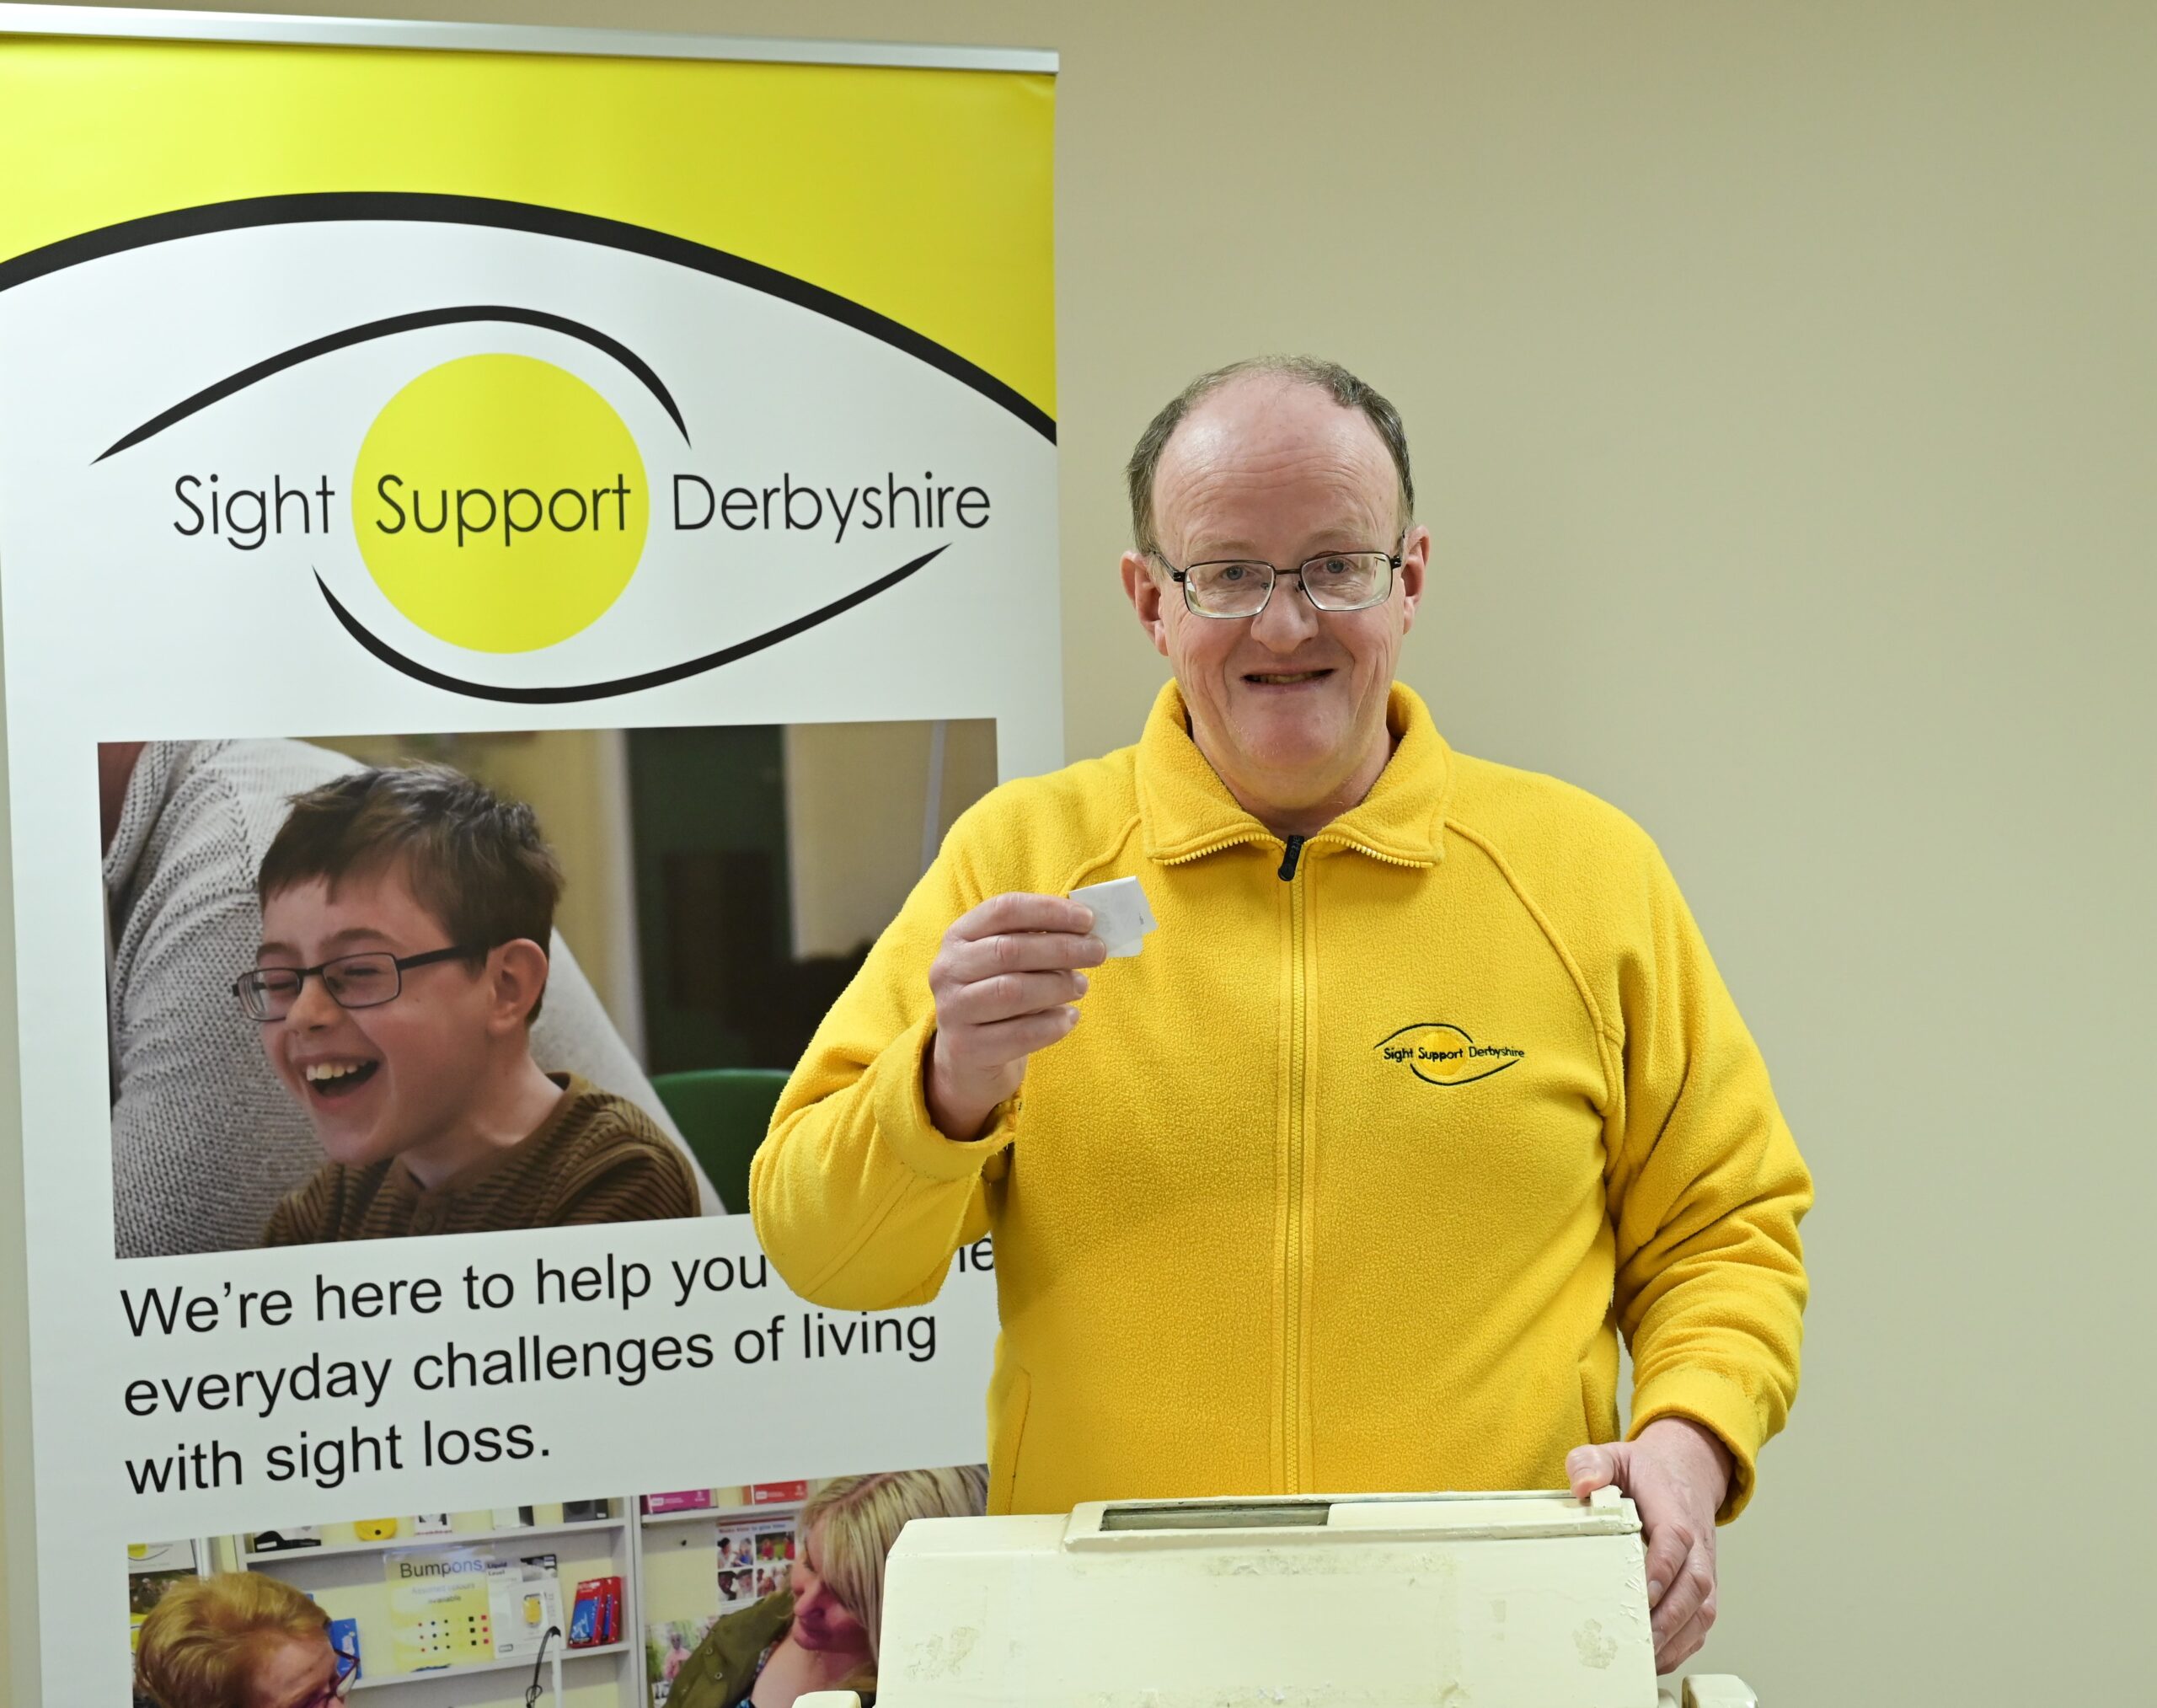 A gentleman wearing a bright yellow fleece with the Sight Support Derbyshire logo is smiling and holding up a raffle ticket which he has just pulled out from a 'tombola' drum. To the left of the picture is a Sight Support Derbyshire banner